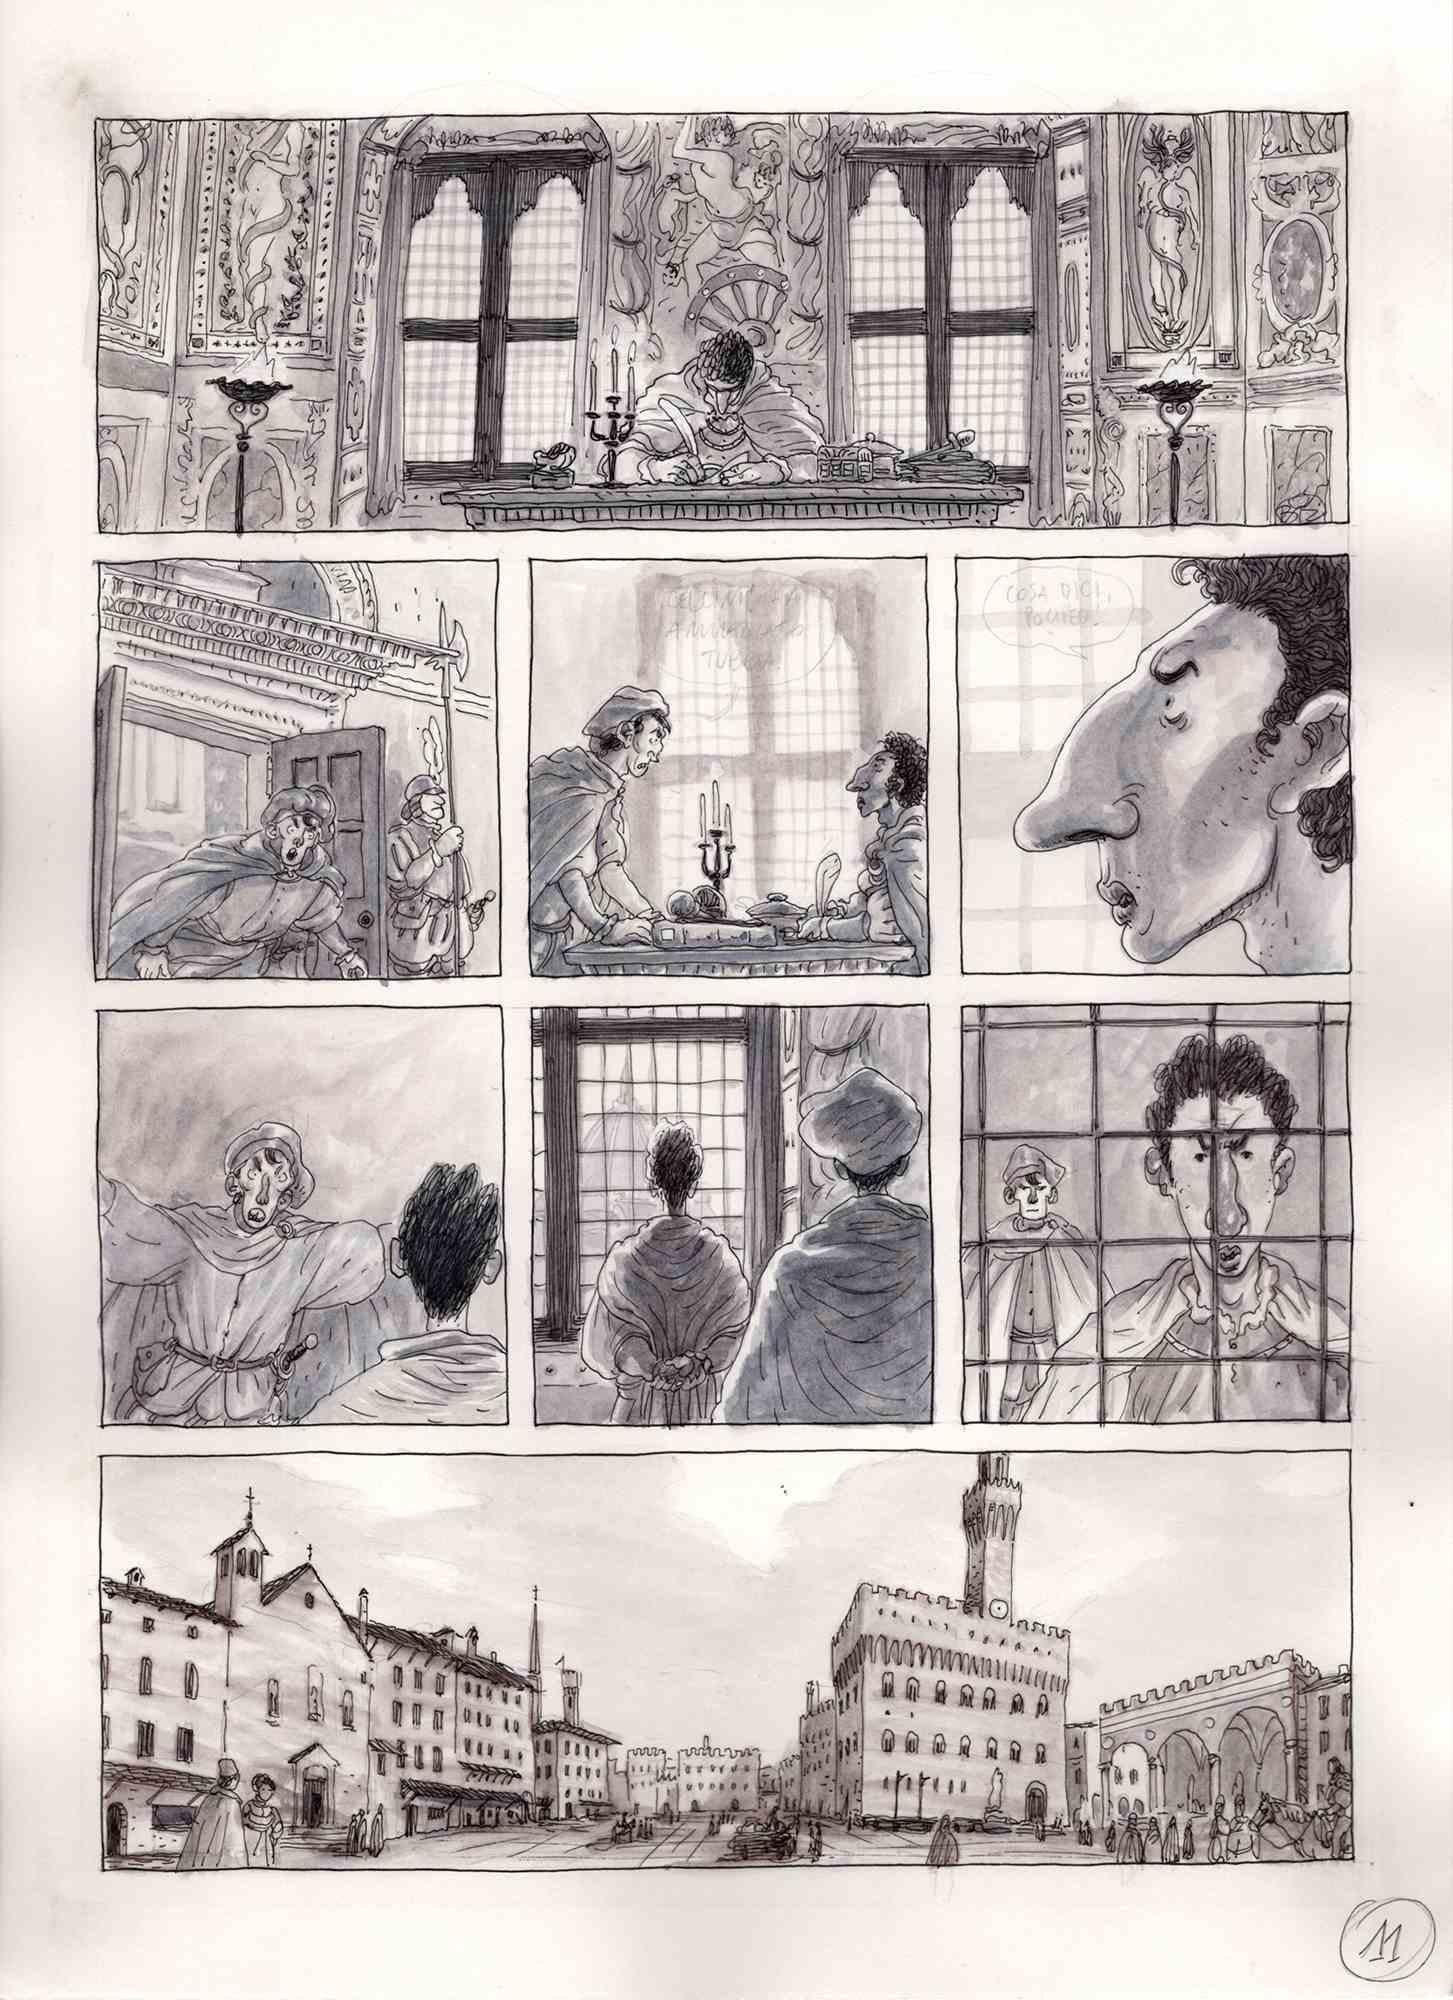 This work entitled "Complaint in Piazza della Signoria" is a table of the graphic novel published in 2016 by Kleiner Flug in Italy "Benvenuto Cellini". The work was done by Vincenzo Bizzarri in 2015 with ink and watercolor on 200gr paper (33x24cm).